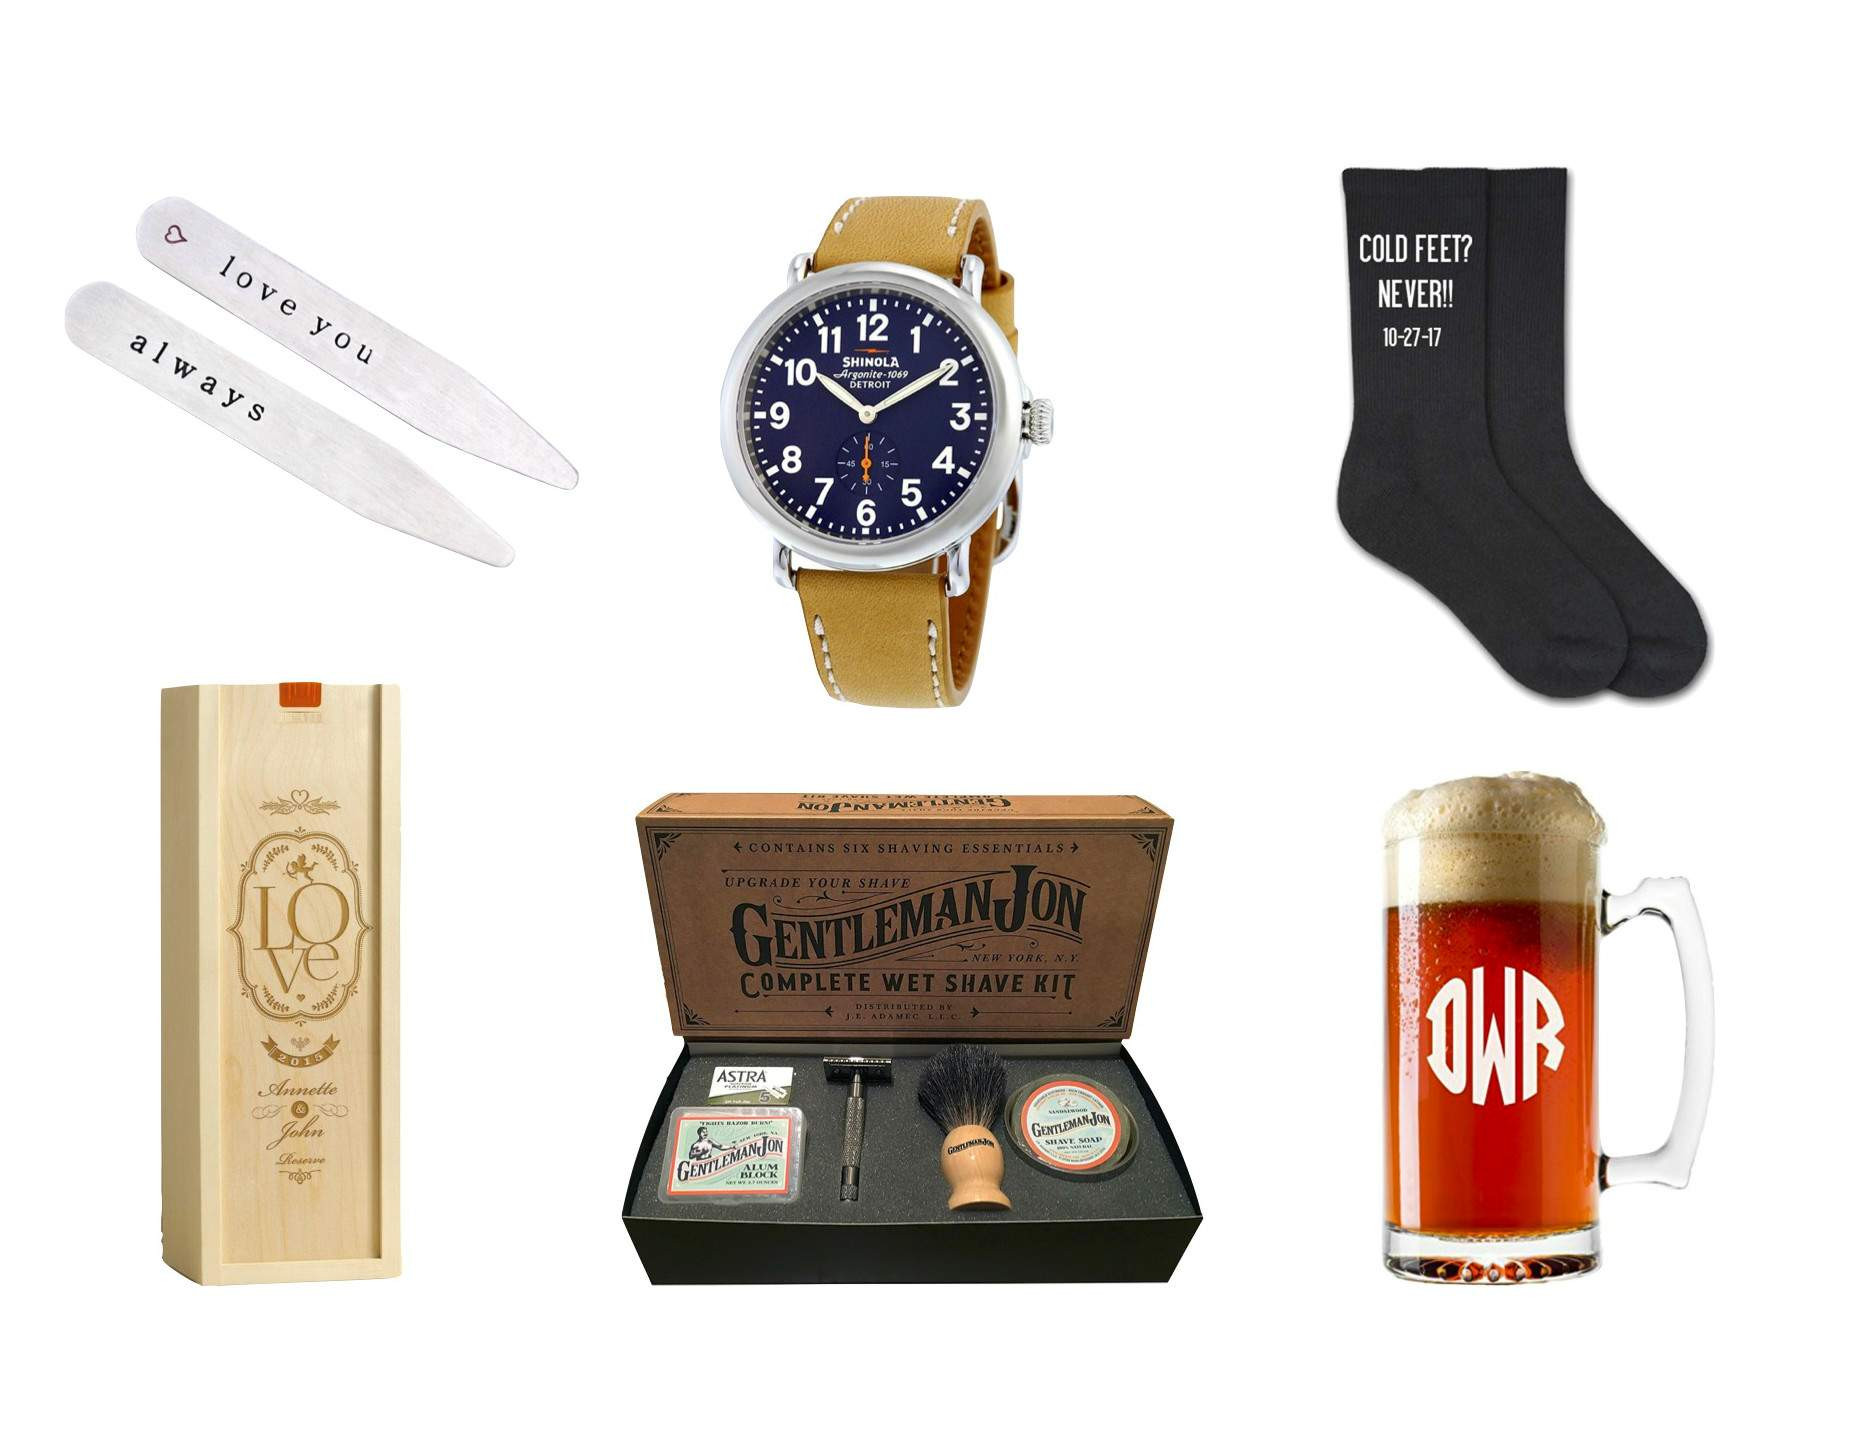 Wedding Gift Ideas For Groom
 Best Wedding Day Gift Ideas From the Bride to the Groom